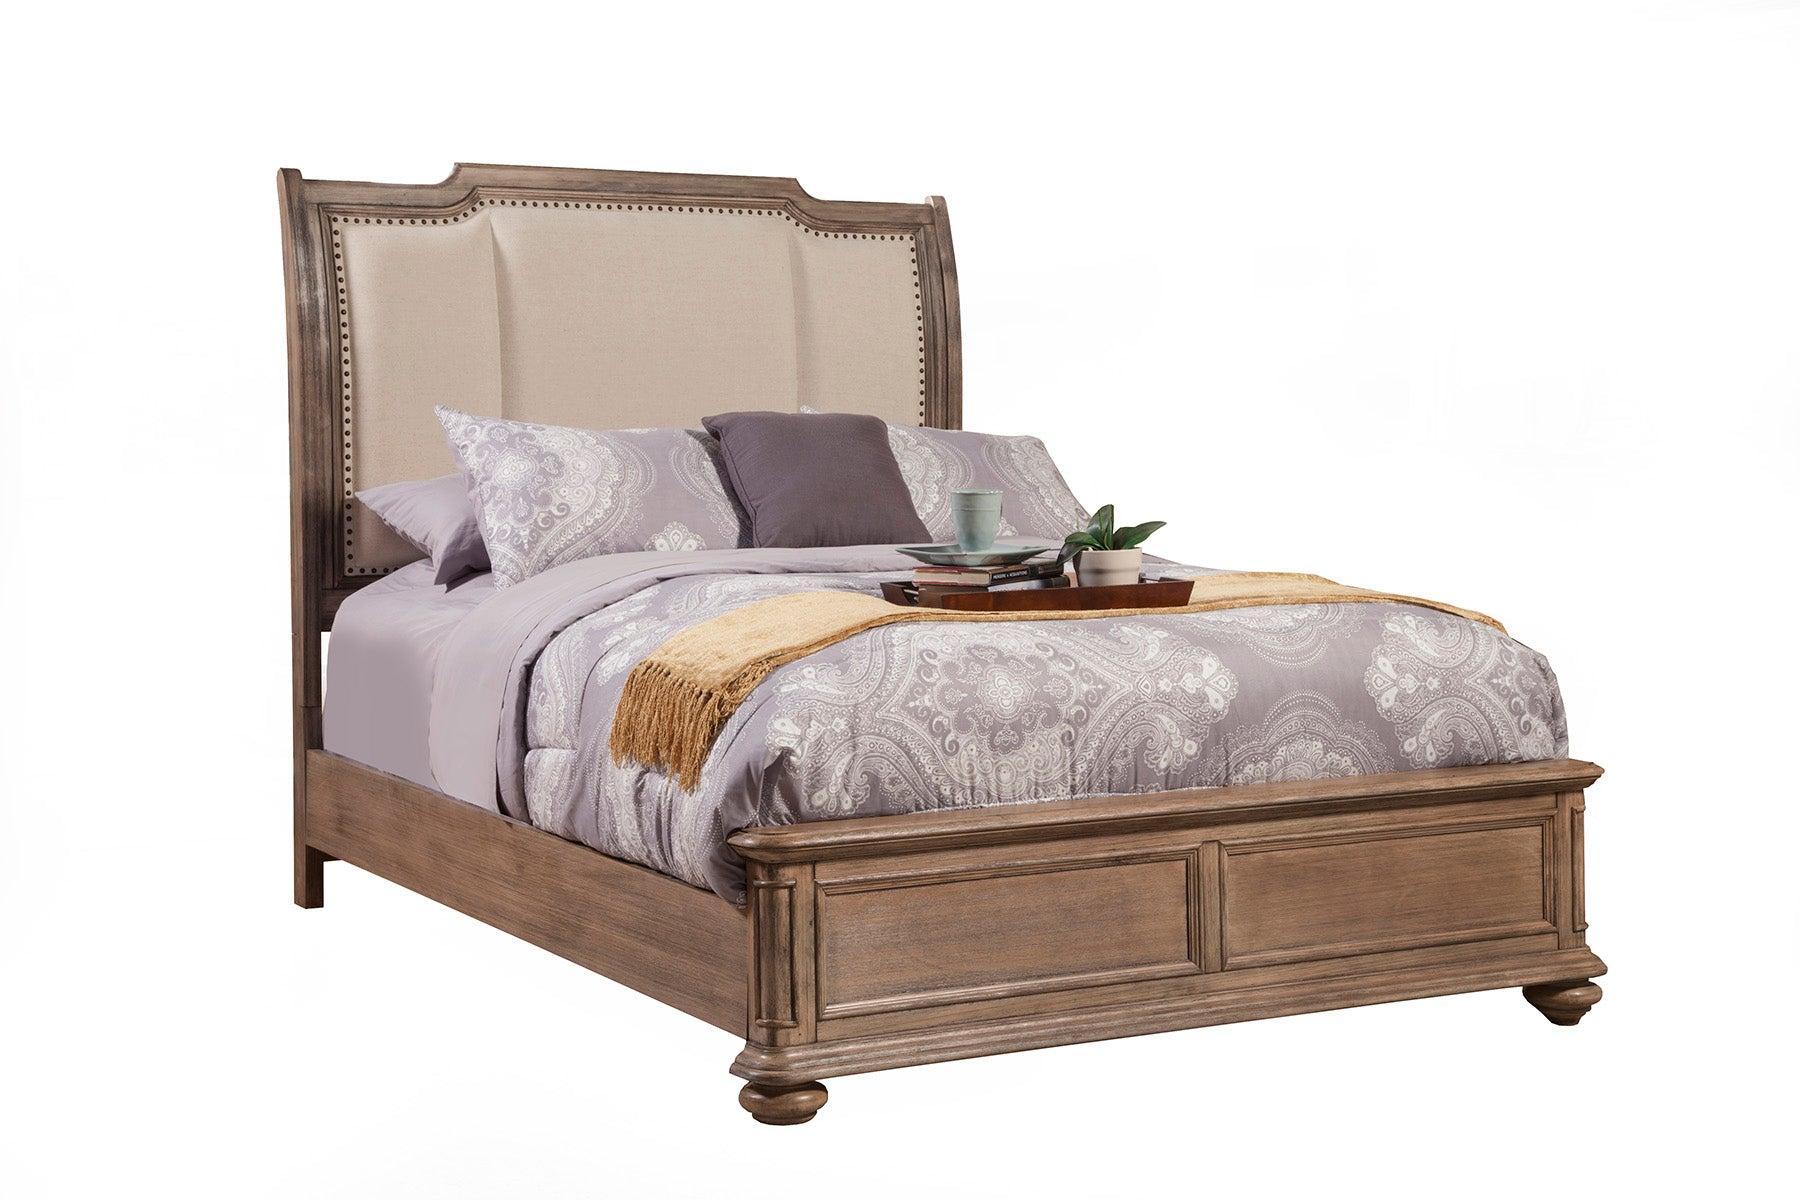 Modern, Traditional Sleigh Bed MELBOURNE 1200-07CK in Truffle Fabric